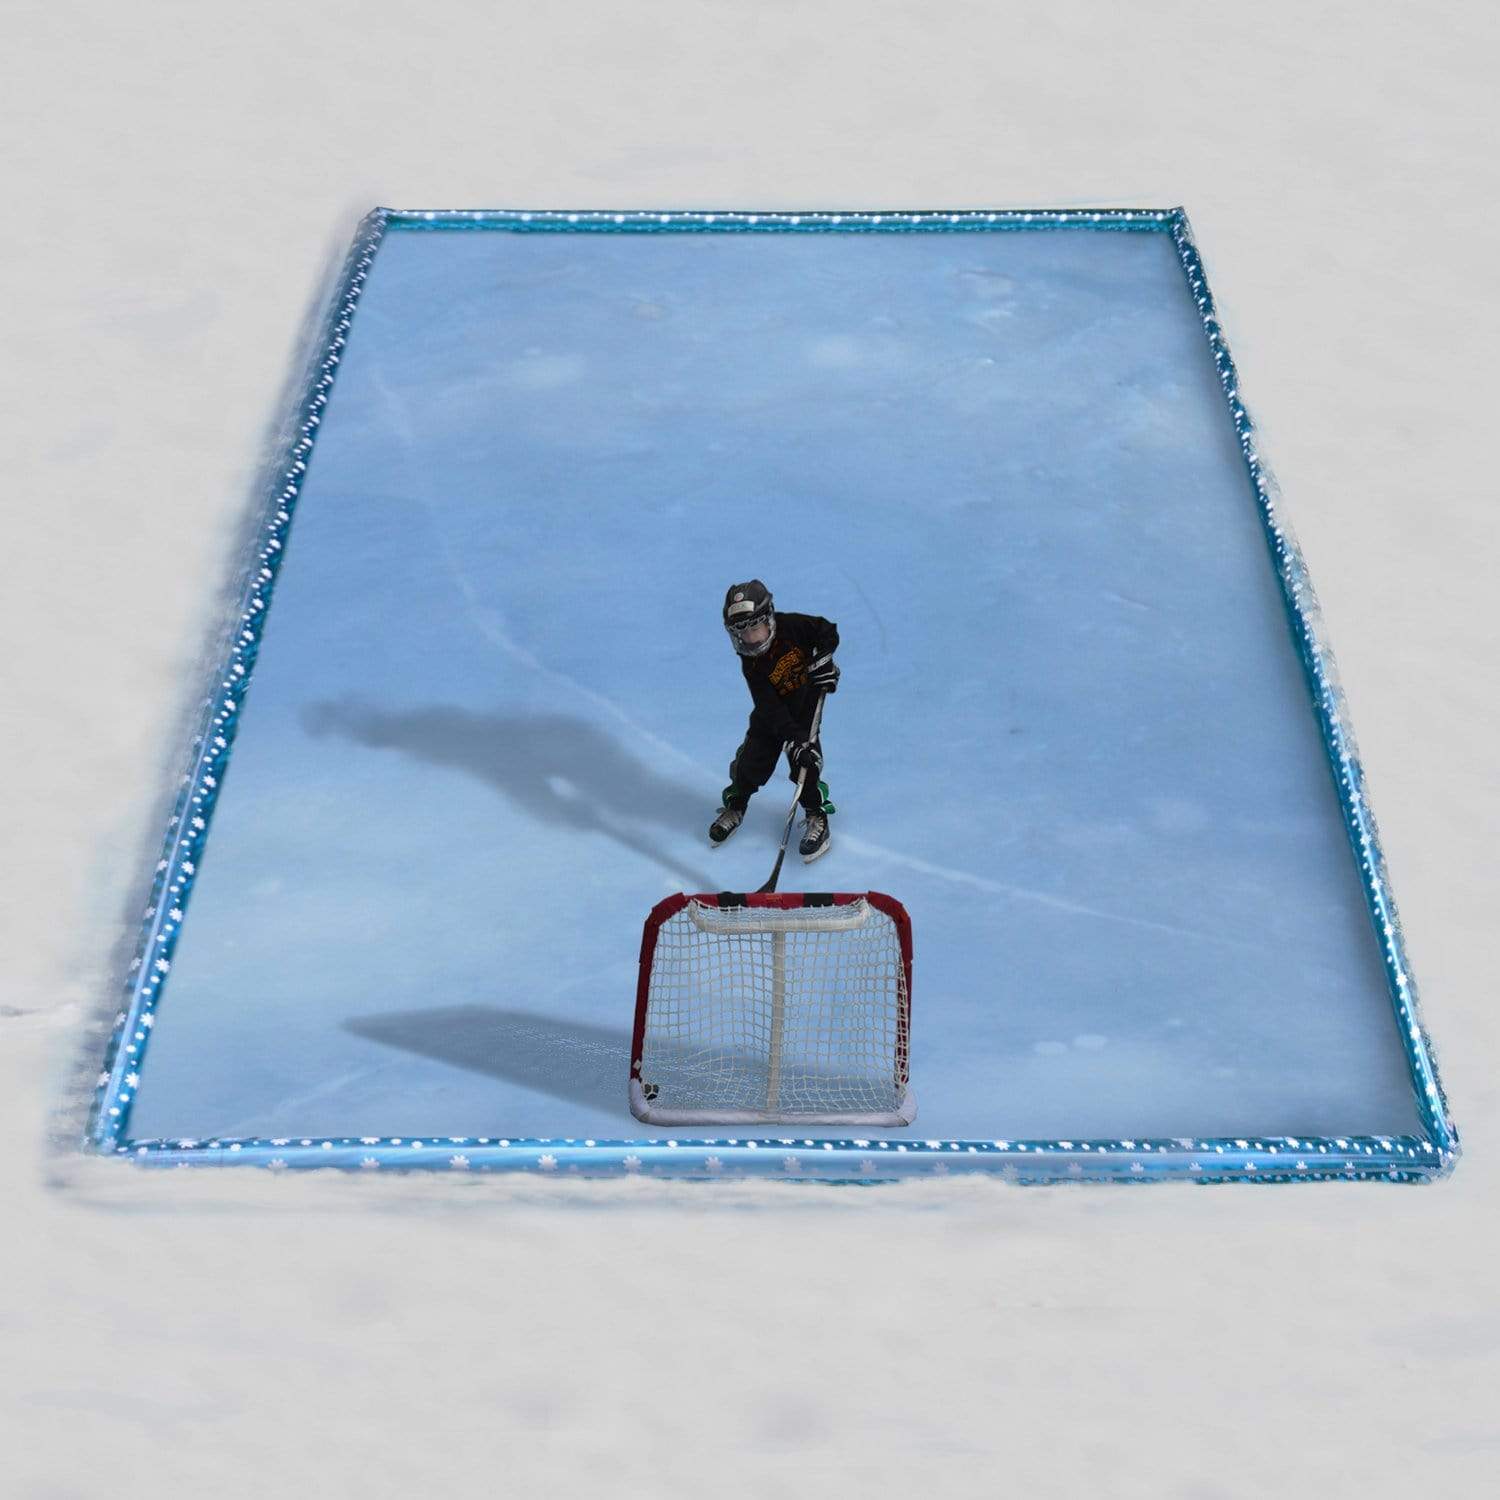 RAVE Winter Ice Rink 15' x 24' Inflatable Ice Rink